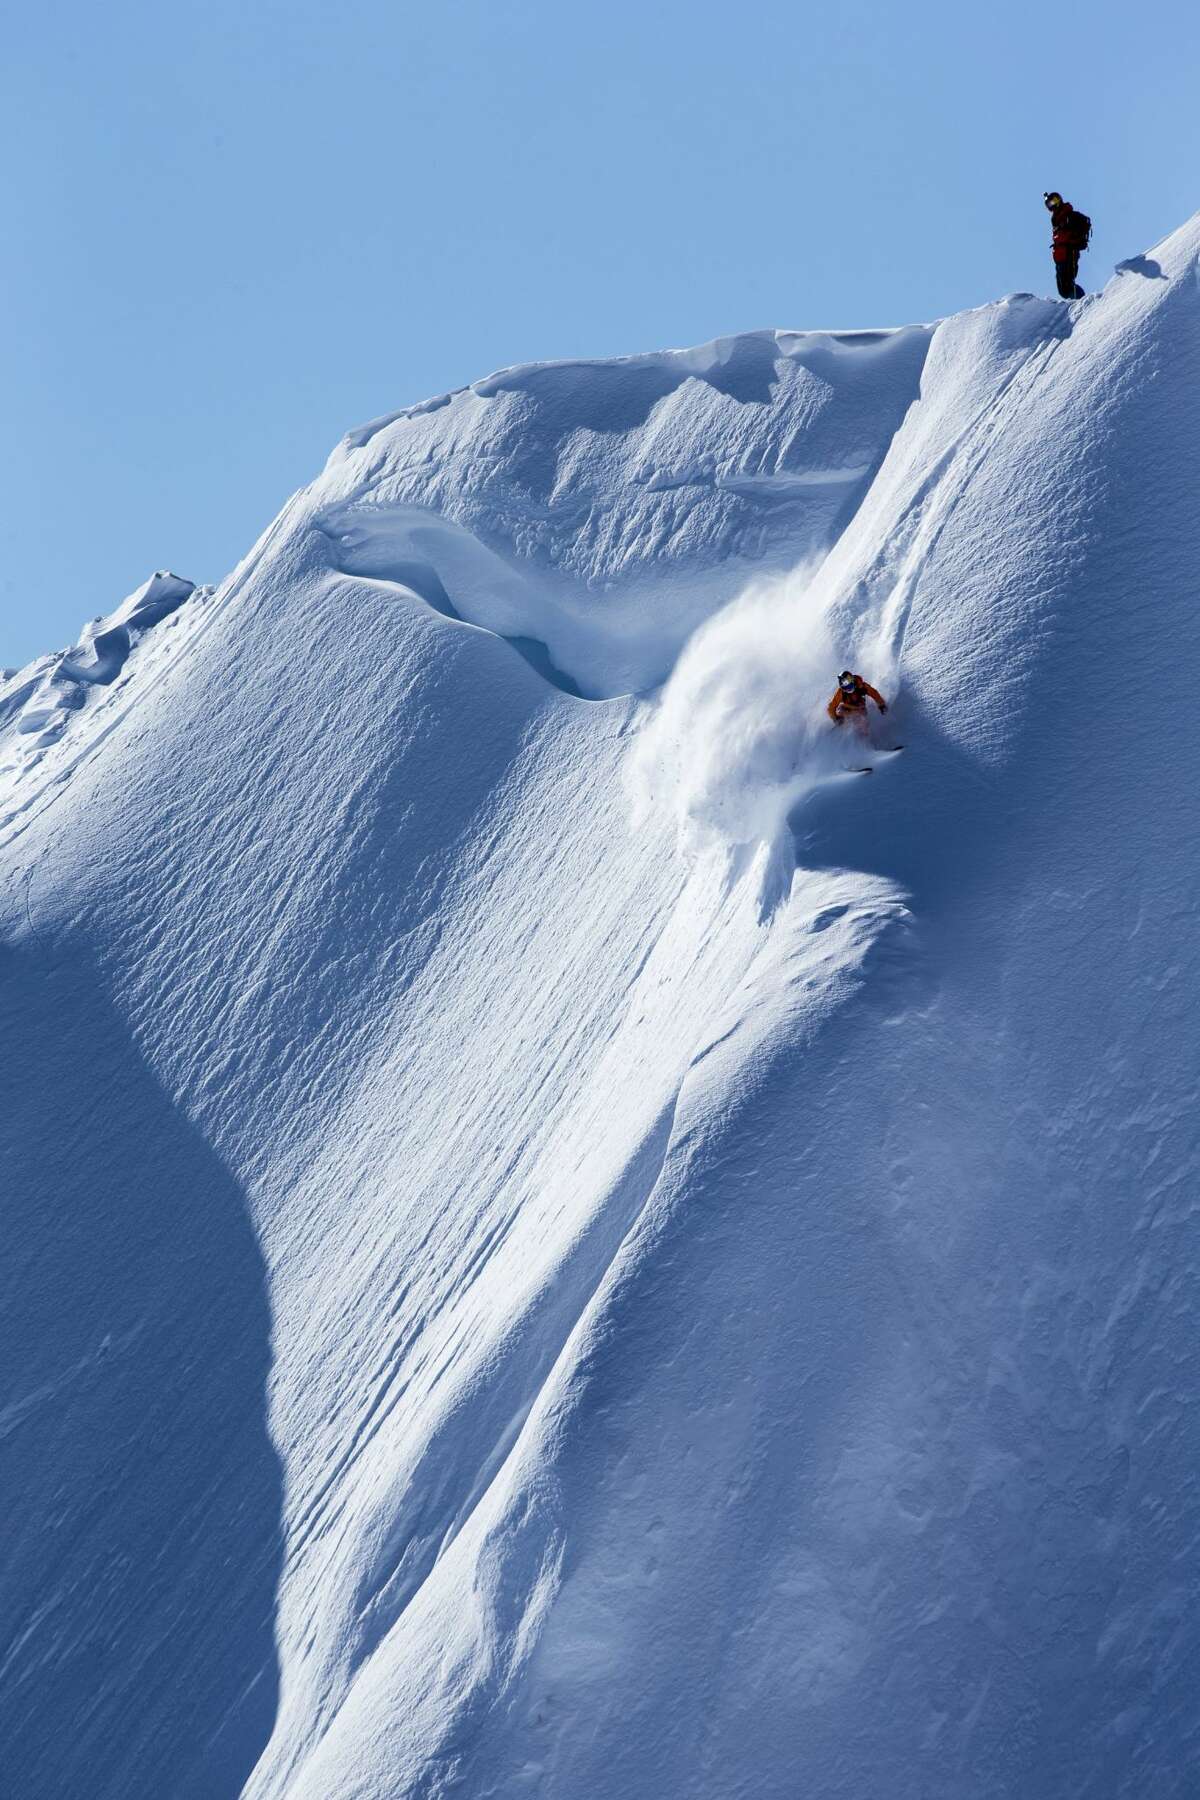 Matilda Rapaport was one of the world's best female extreme skiers.